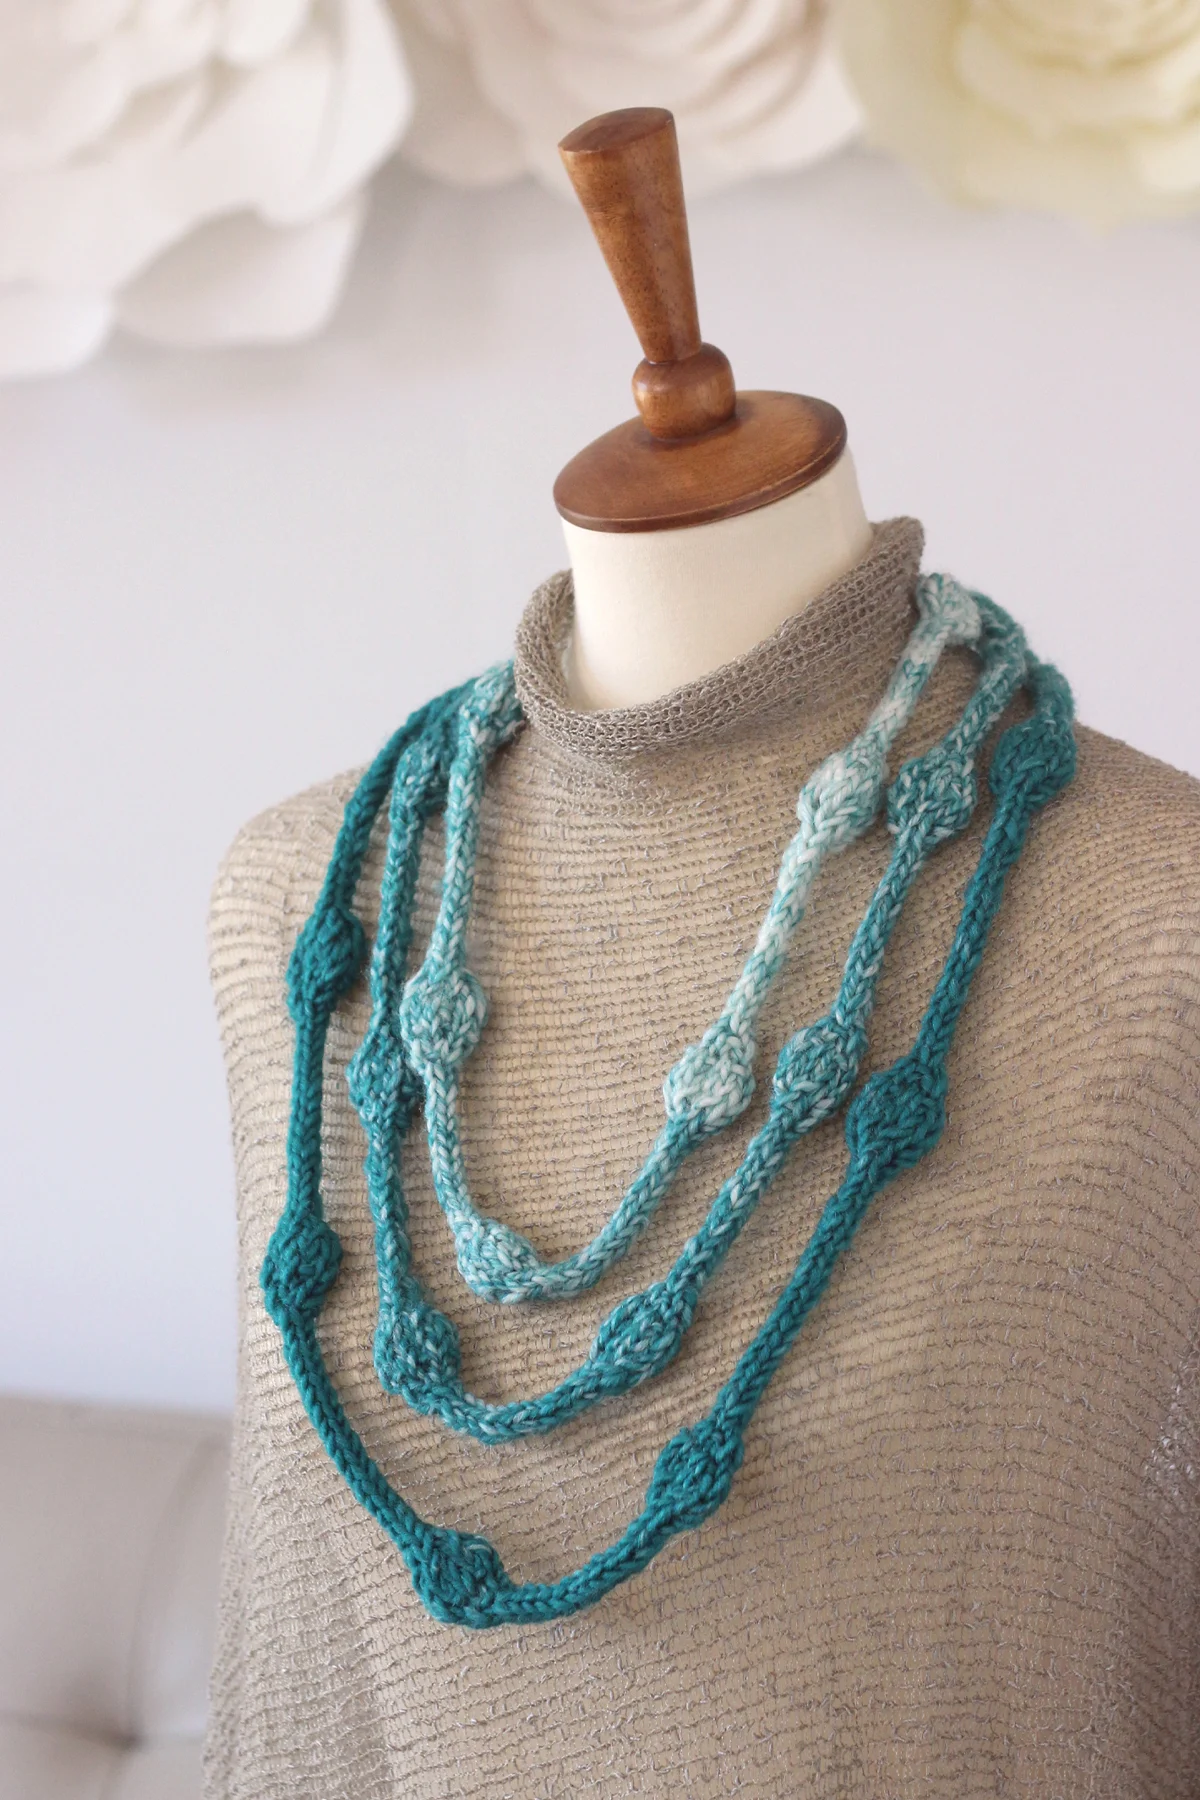 Netted Beaded Scarf Class - Island Cove Beads & Gallery